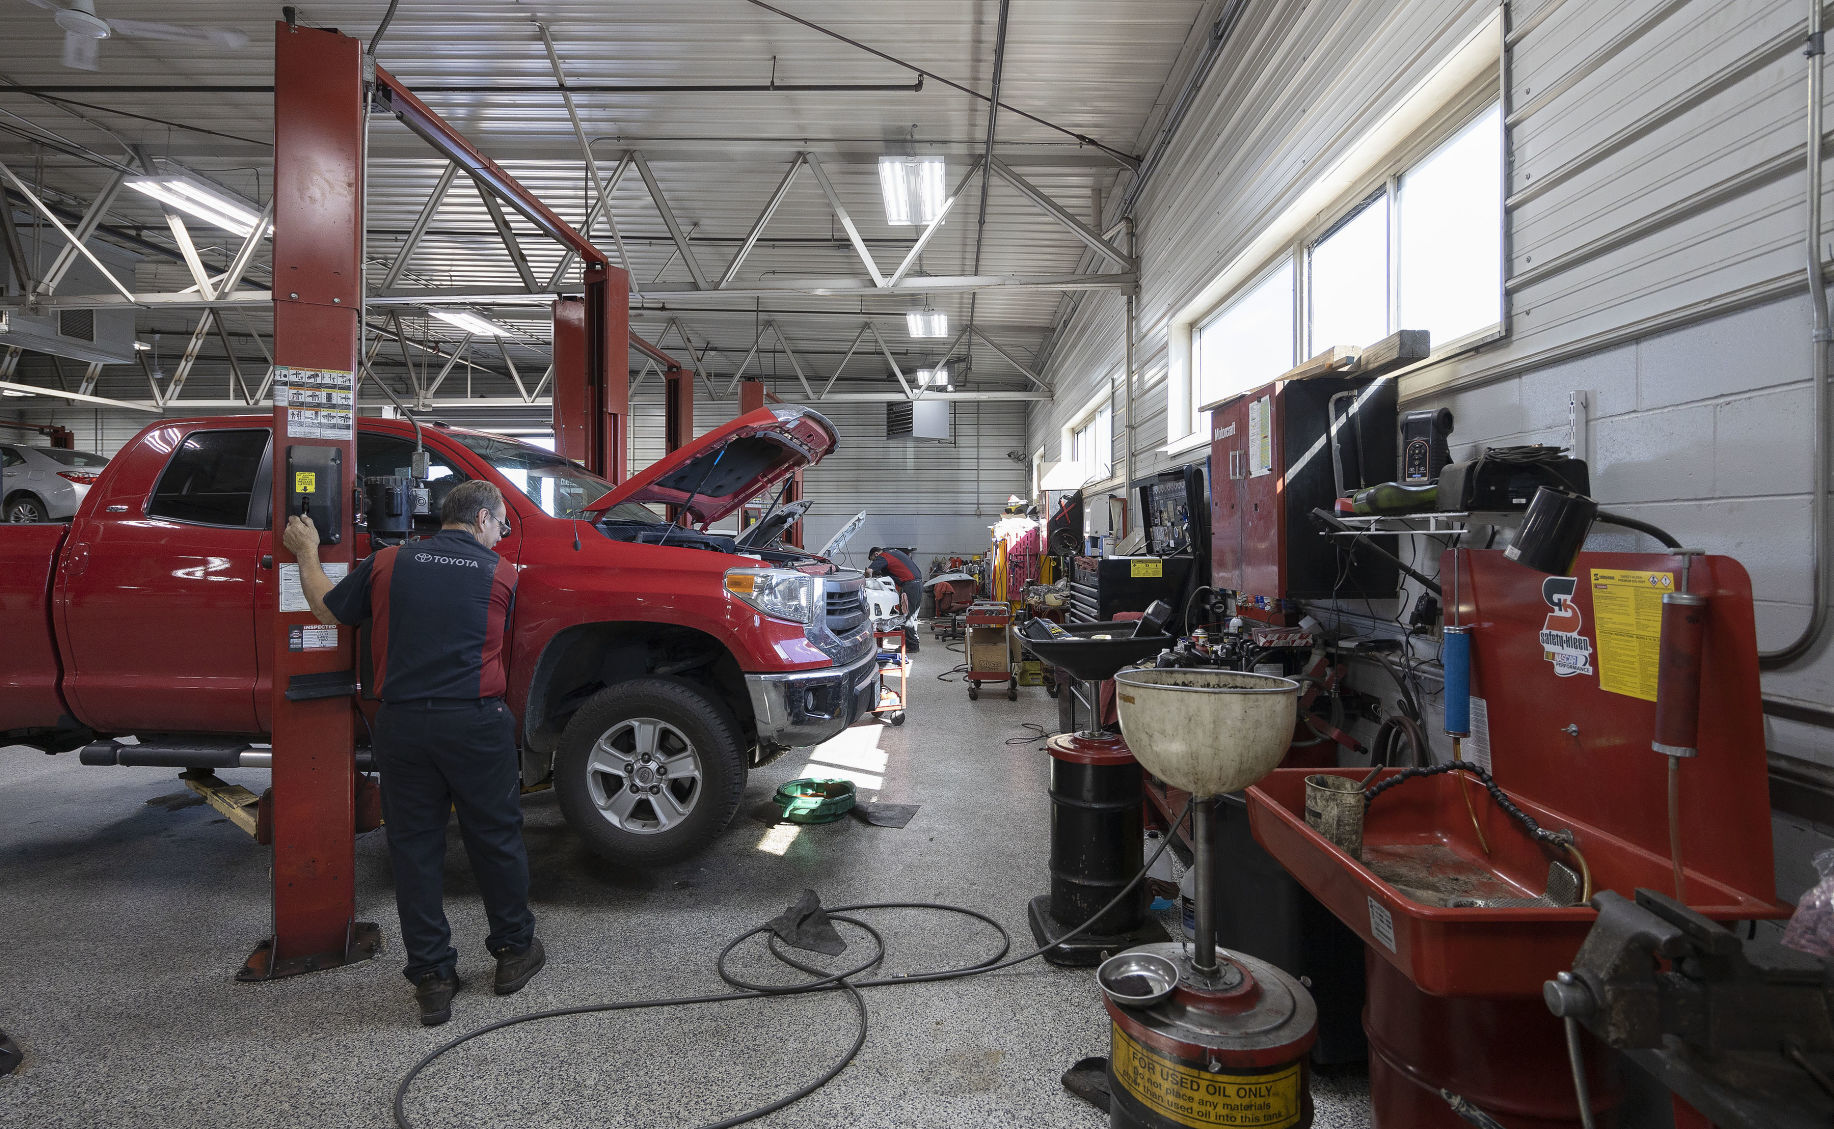 The service bay at Anderson-Weber Toyota in Dubuque.    PHOTO CREDIT: Stephen Gassman